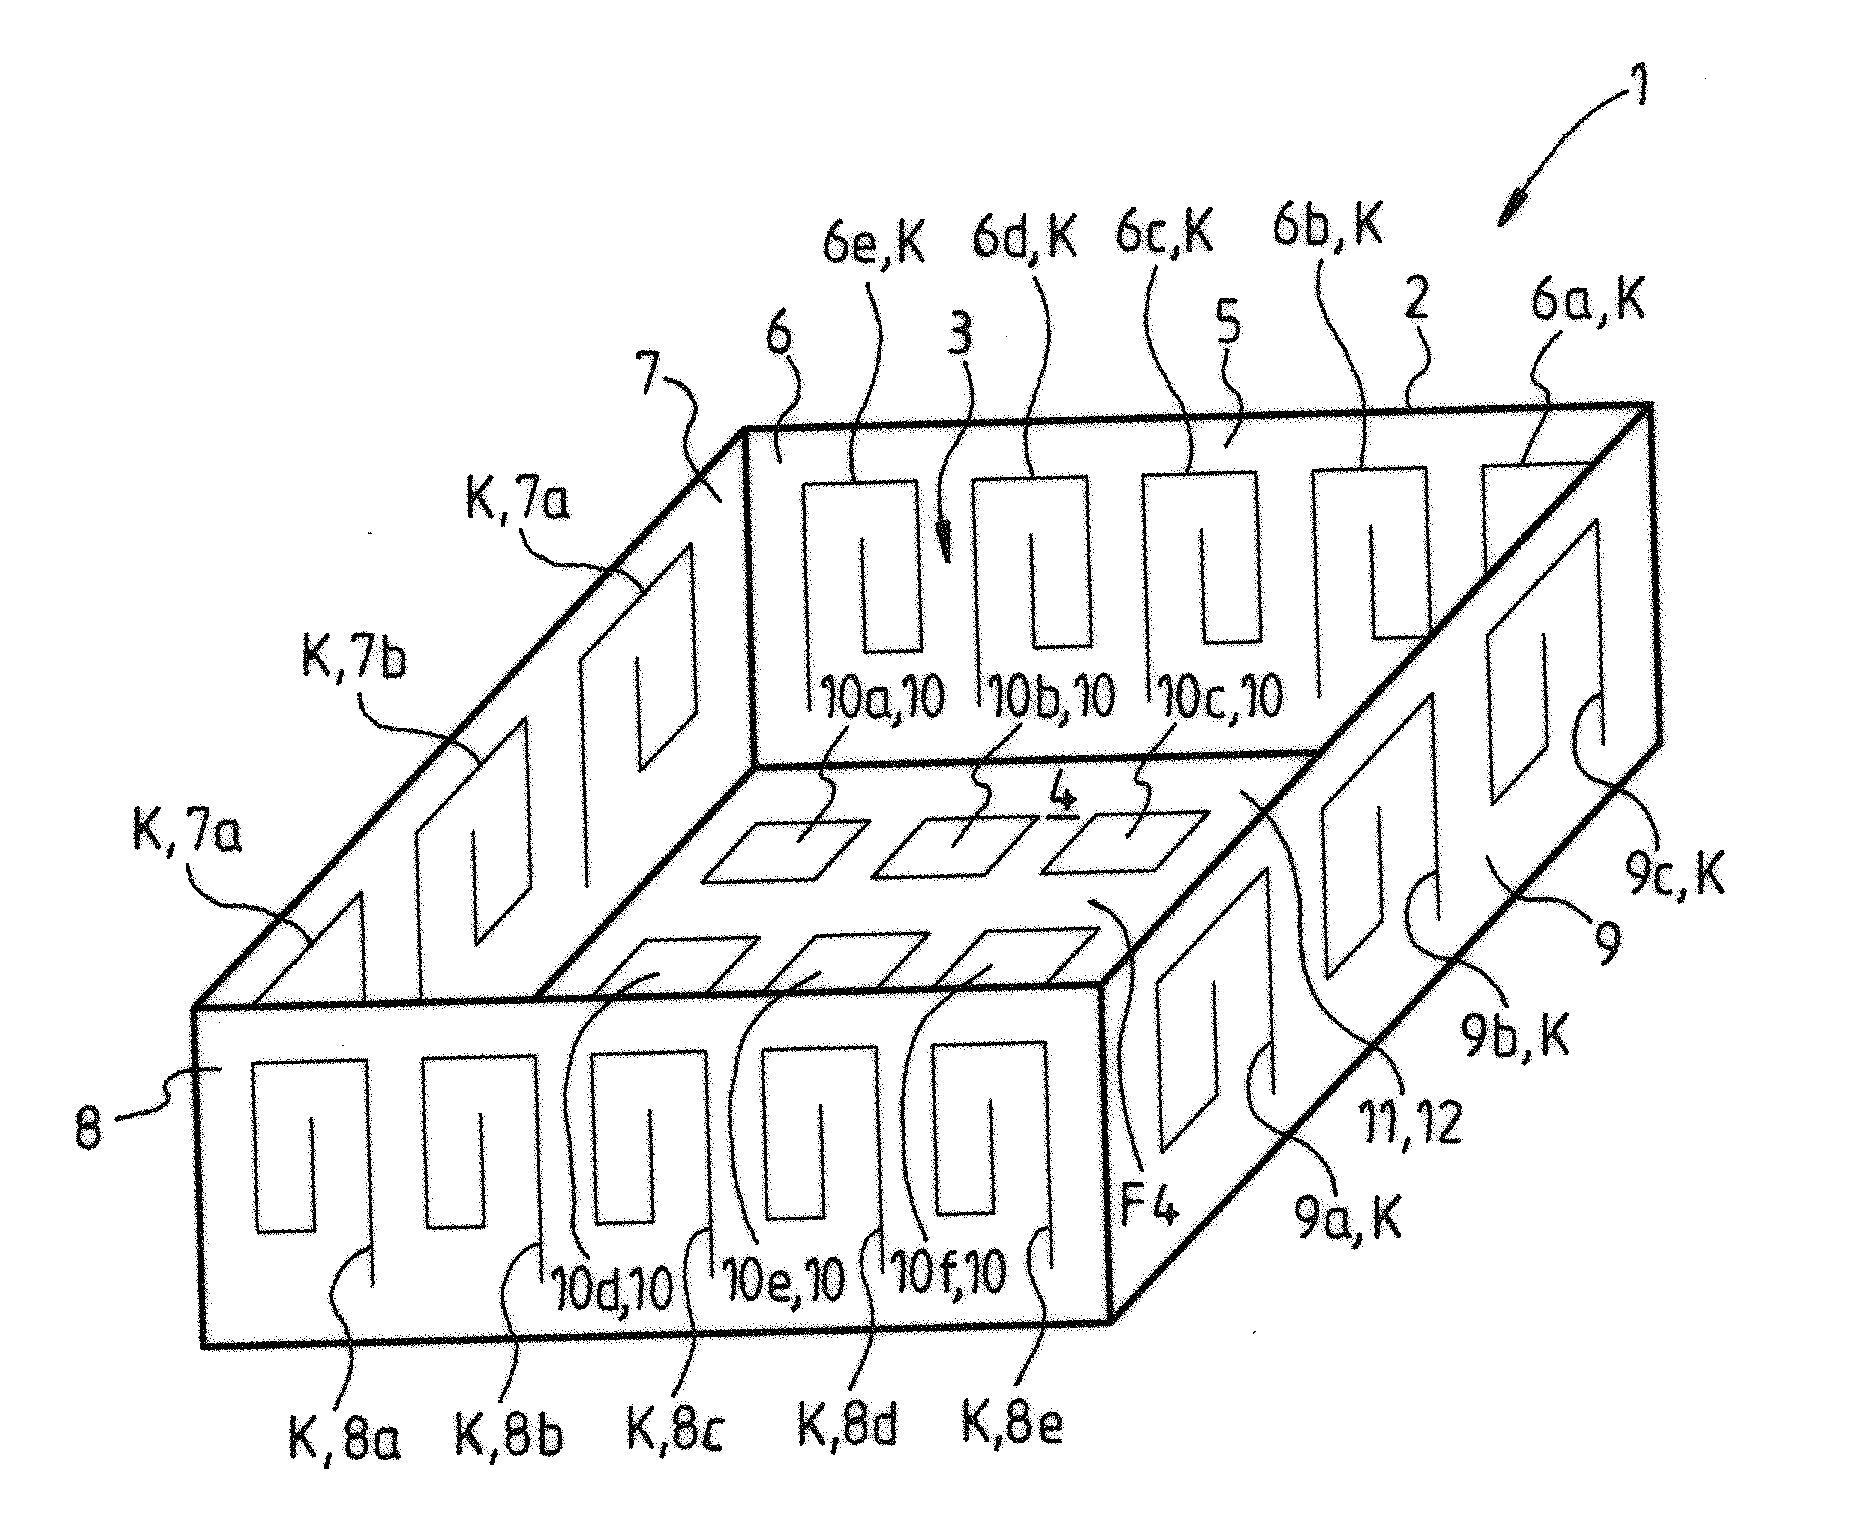 Integration device and method of manufacturing a shell for a cradle